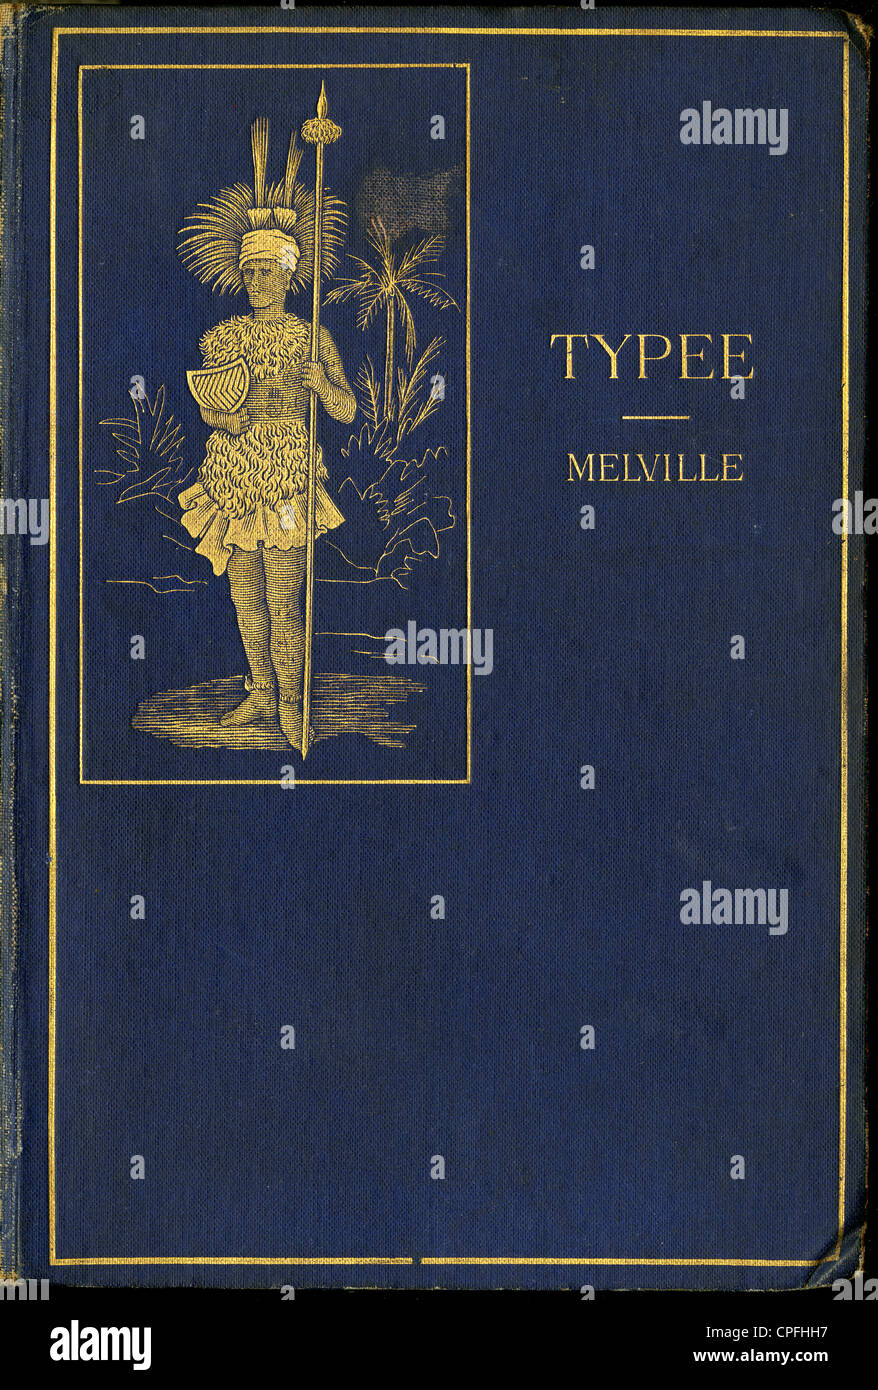 1893 edition of Herman Melville's Typee. The art shows a Marquesan Warrior. Stock Photo